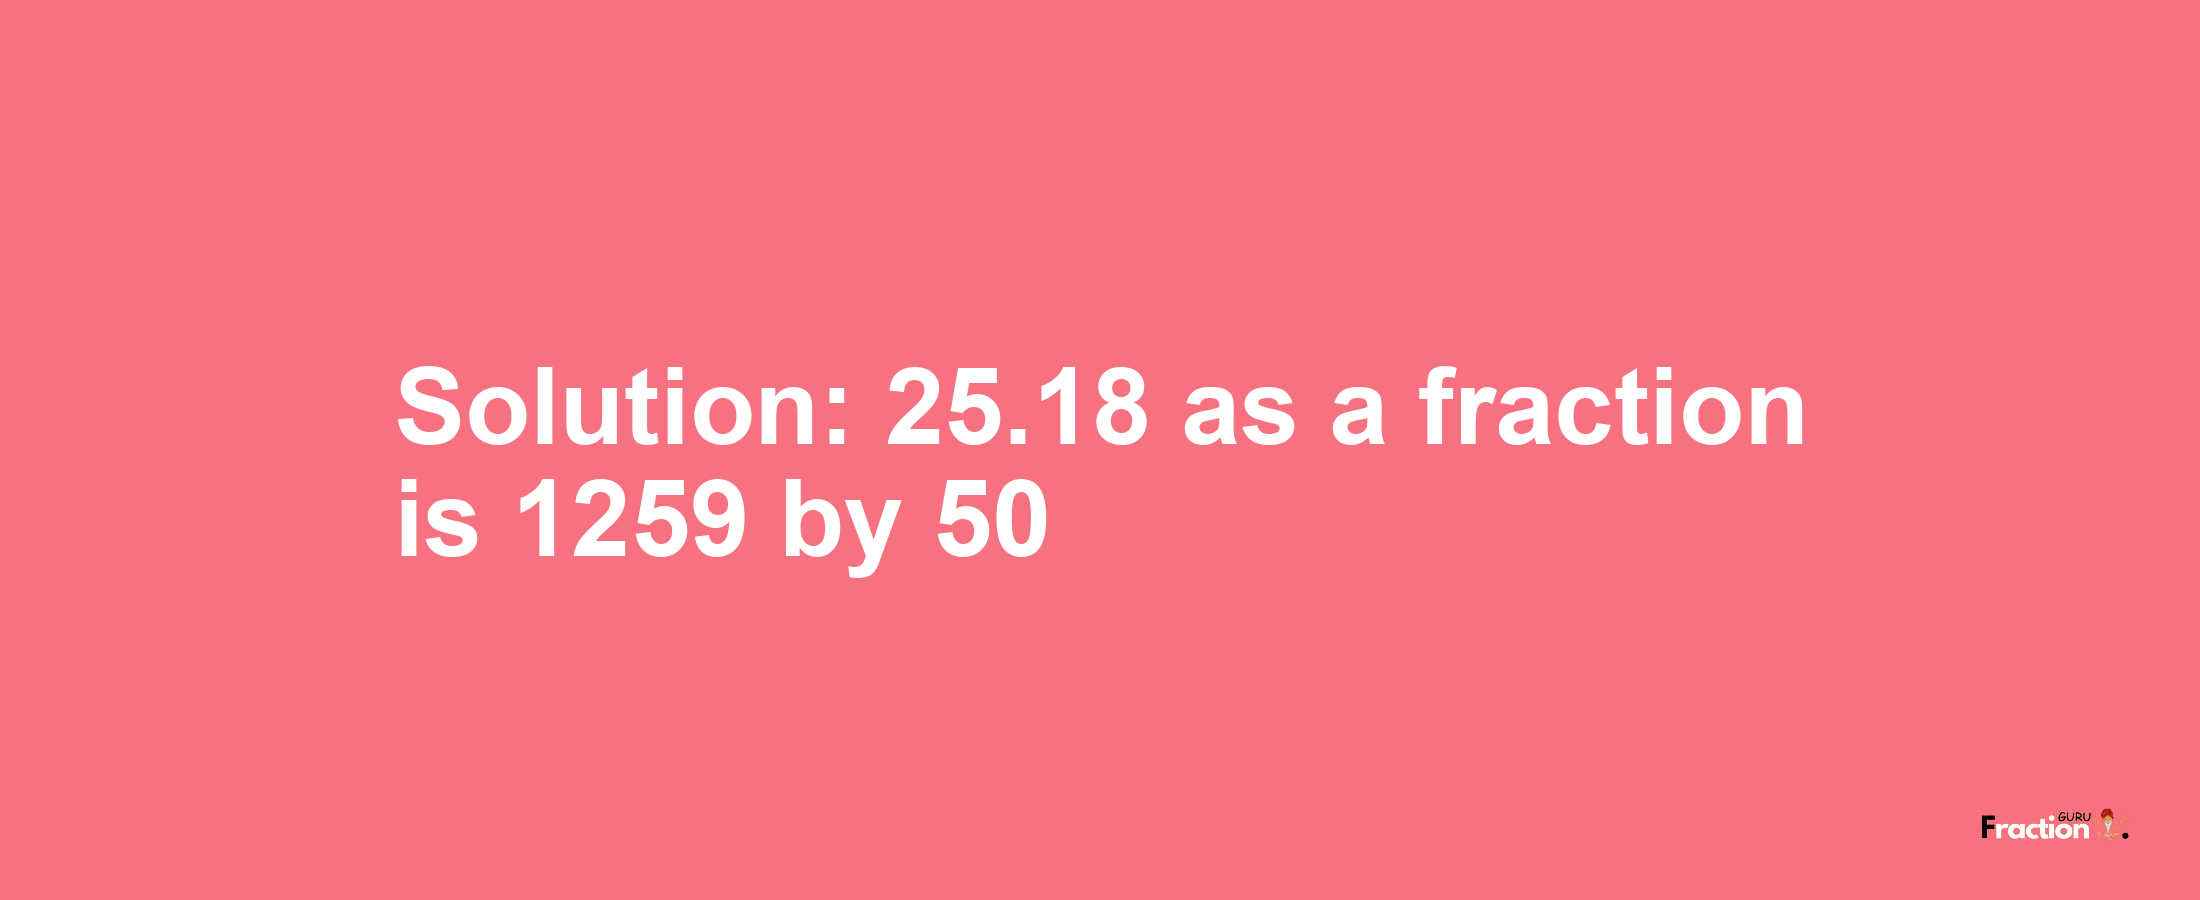 Solution:25.18 as a fraction is 1259/50